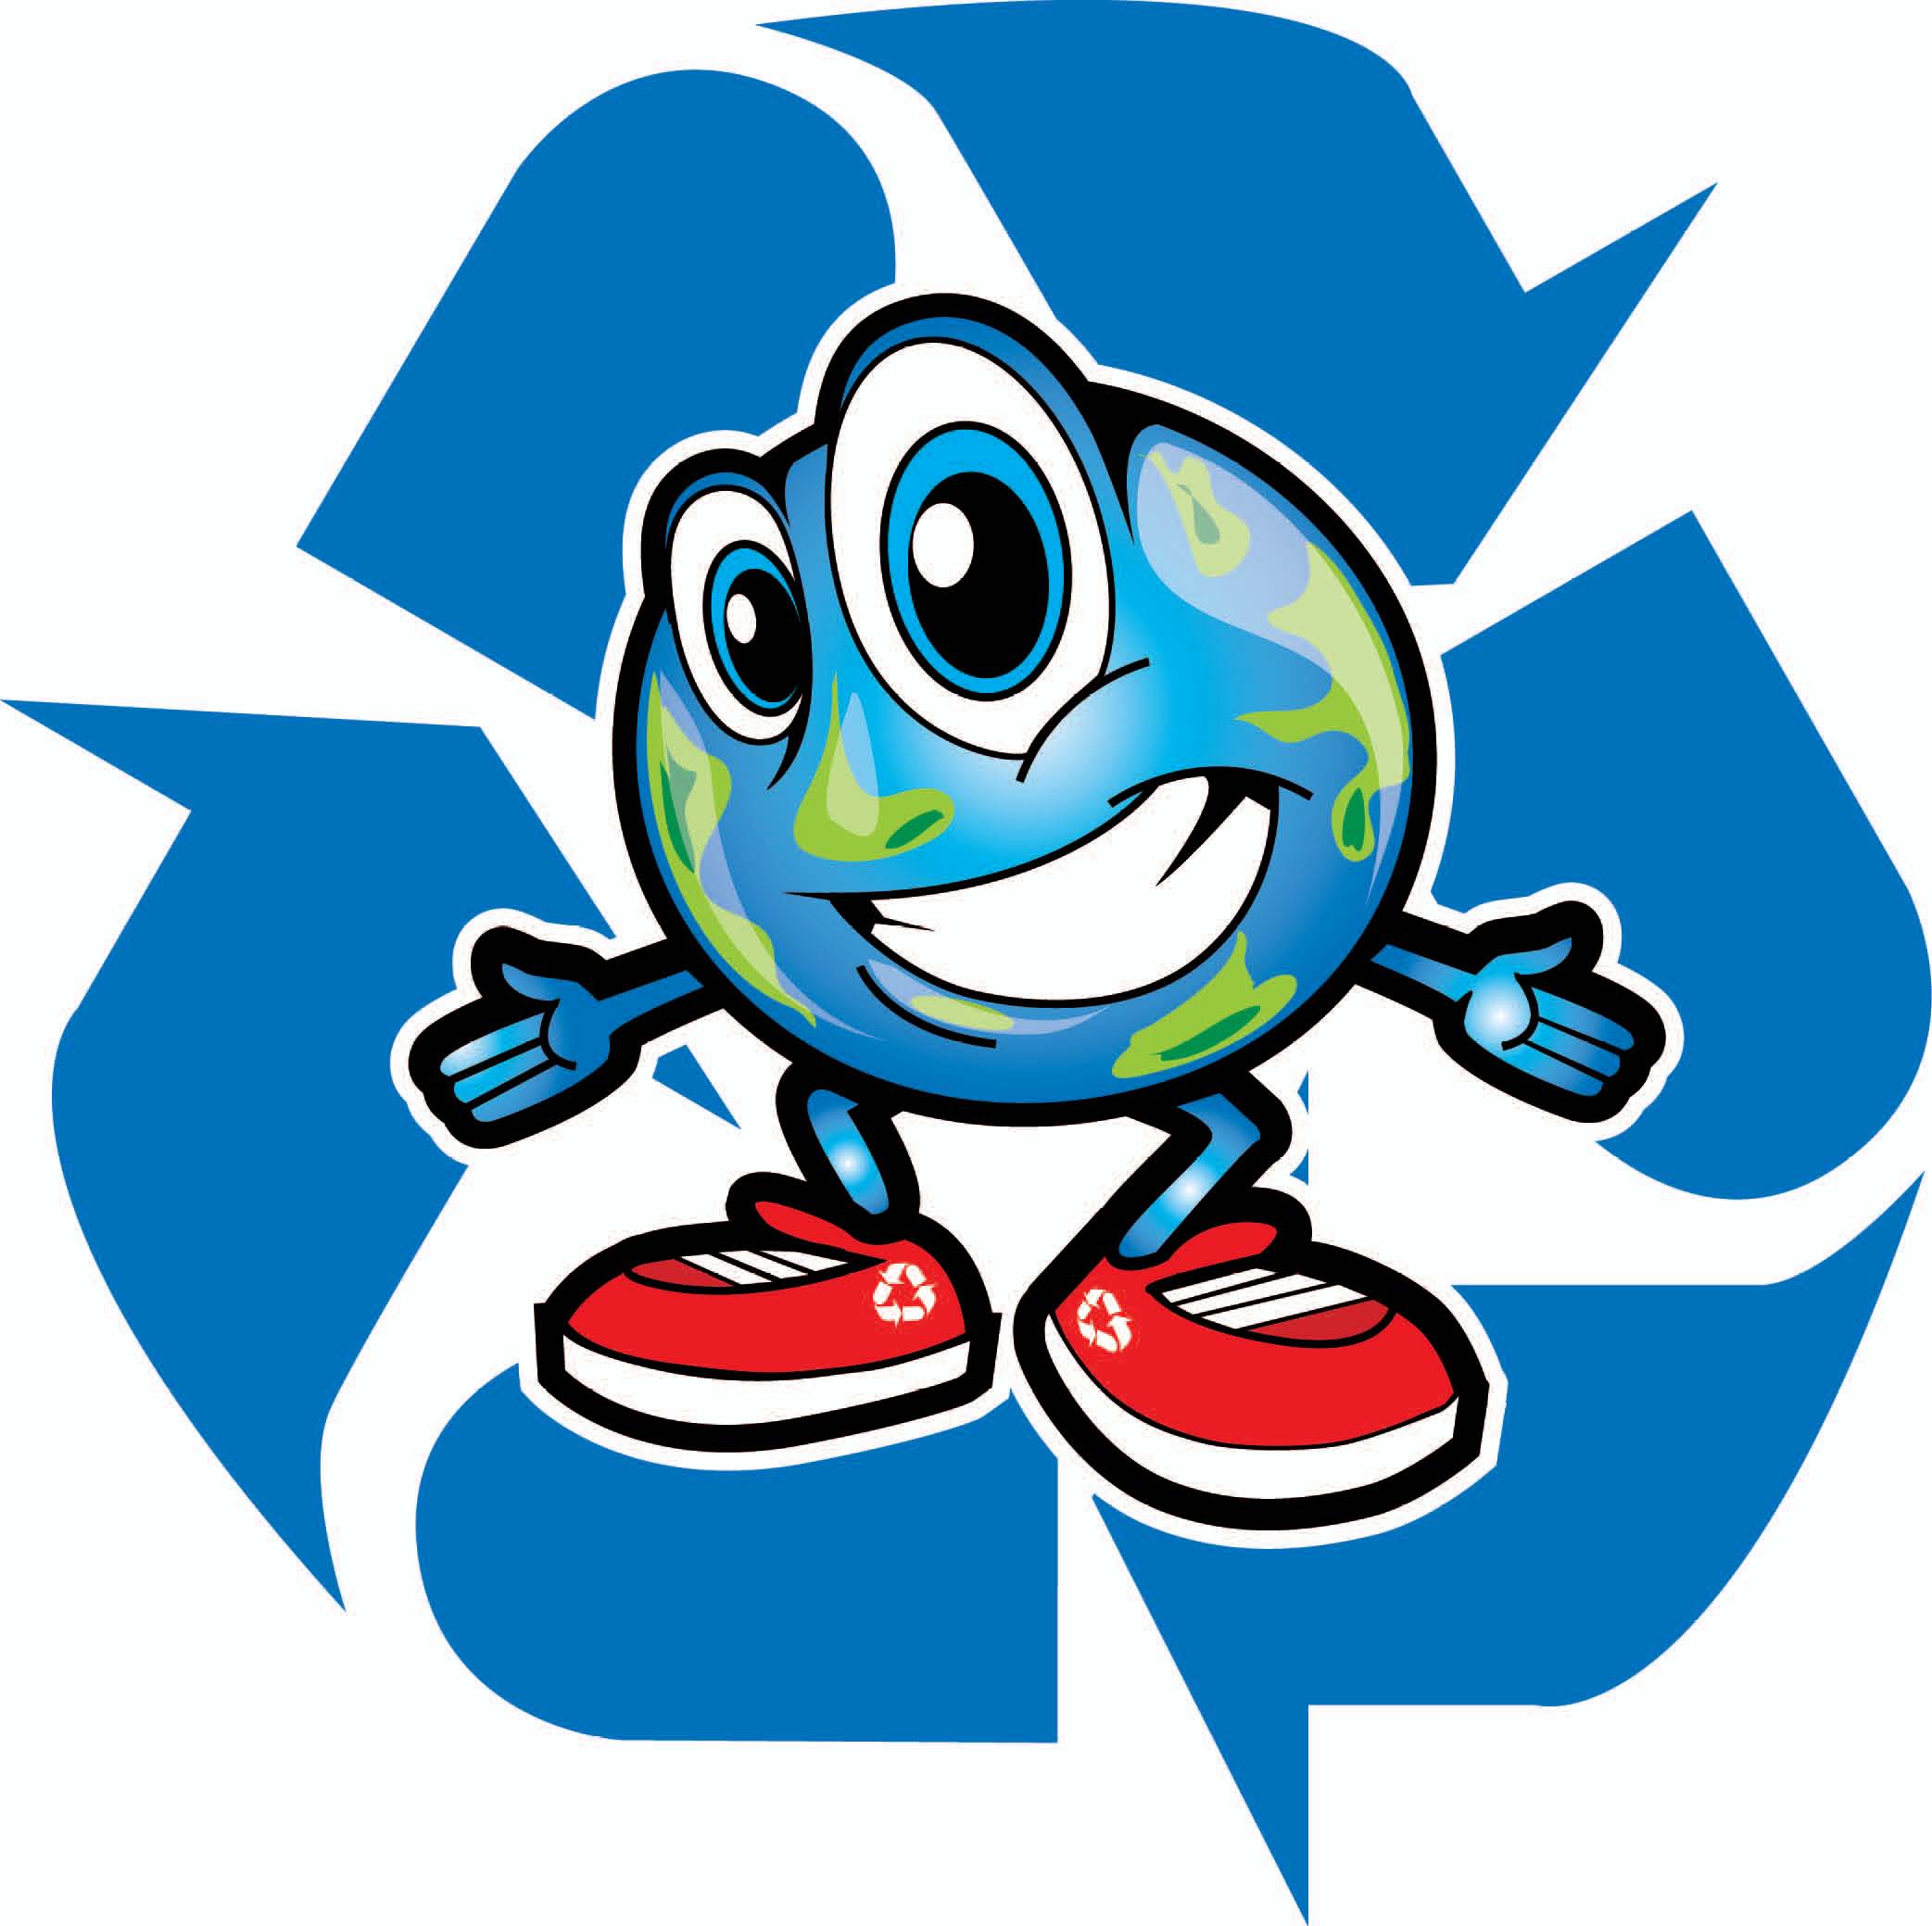 Reduce Reuse Recycle Symbol Cliparts Co 2457 Hot Sex Picture